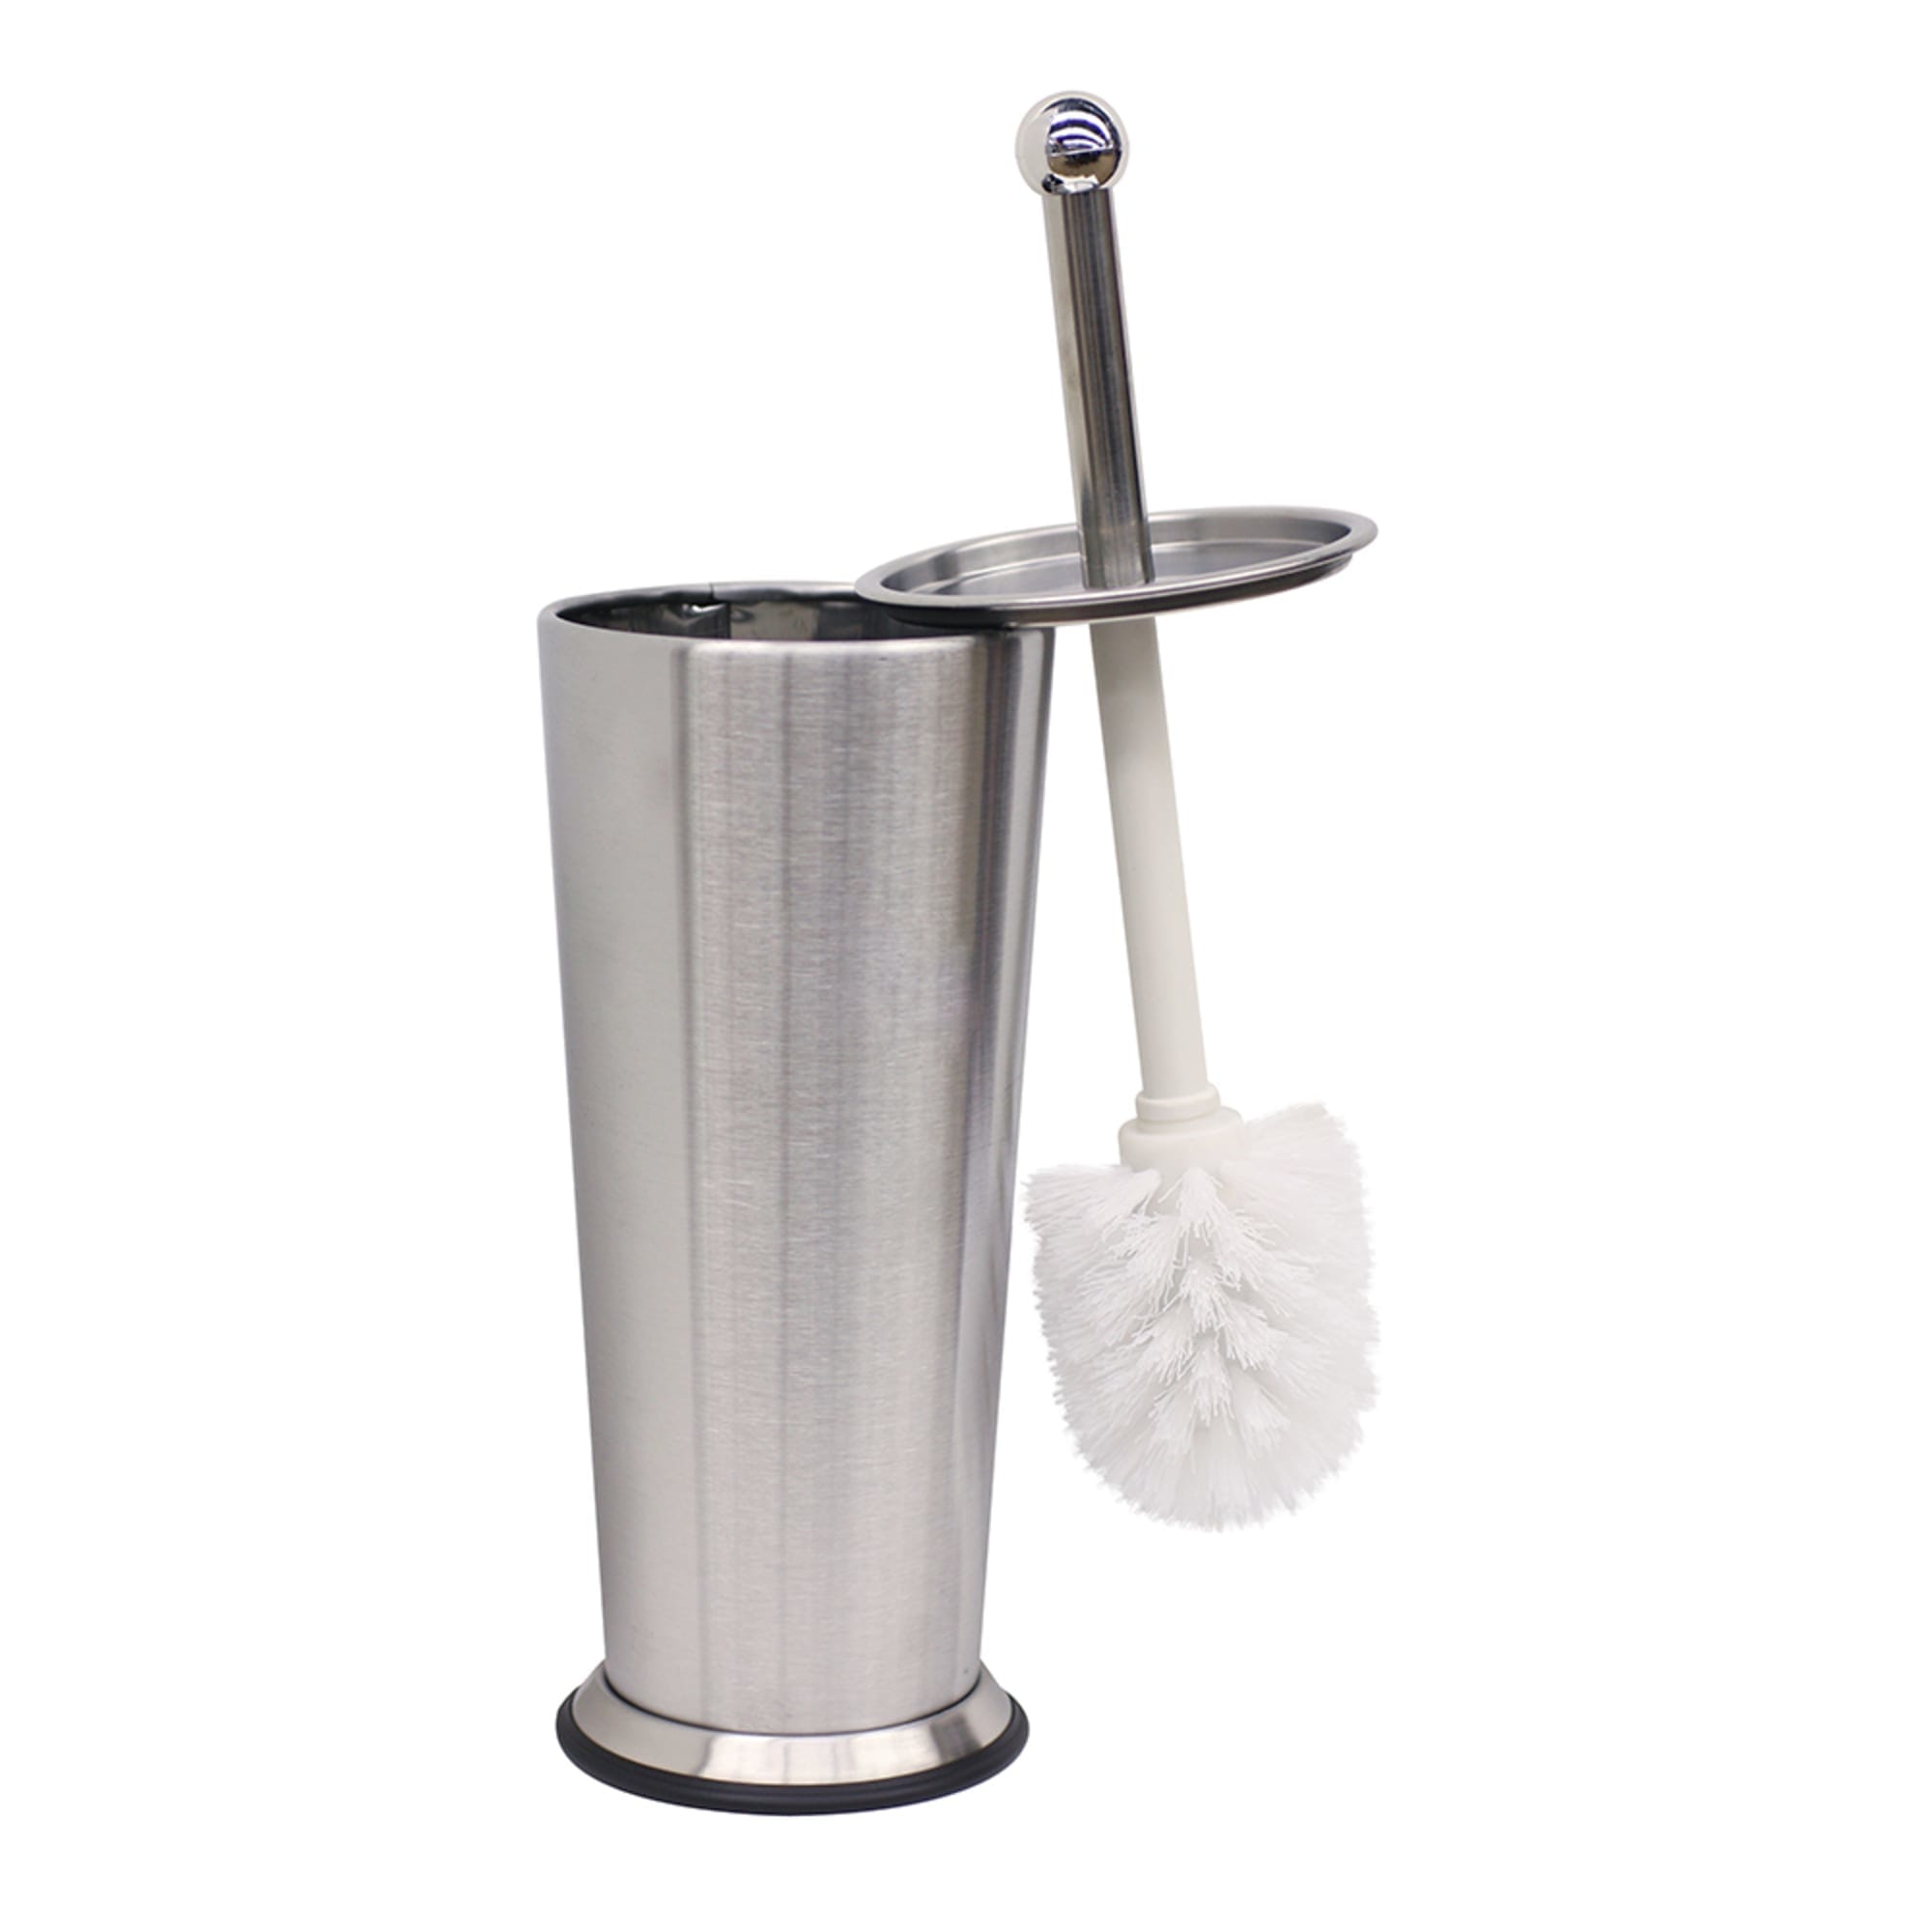 Home Basics Stainless Steel Tapered Toilet Brush, Silver $6.00 EACH, CASE PACK OF 12